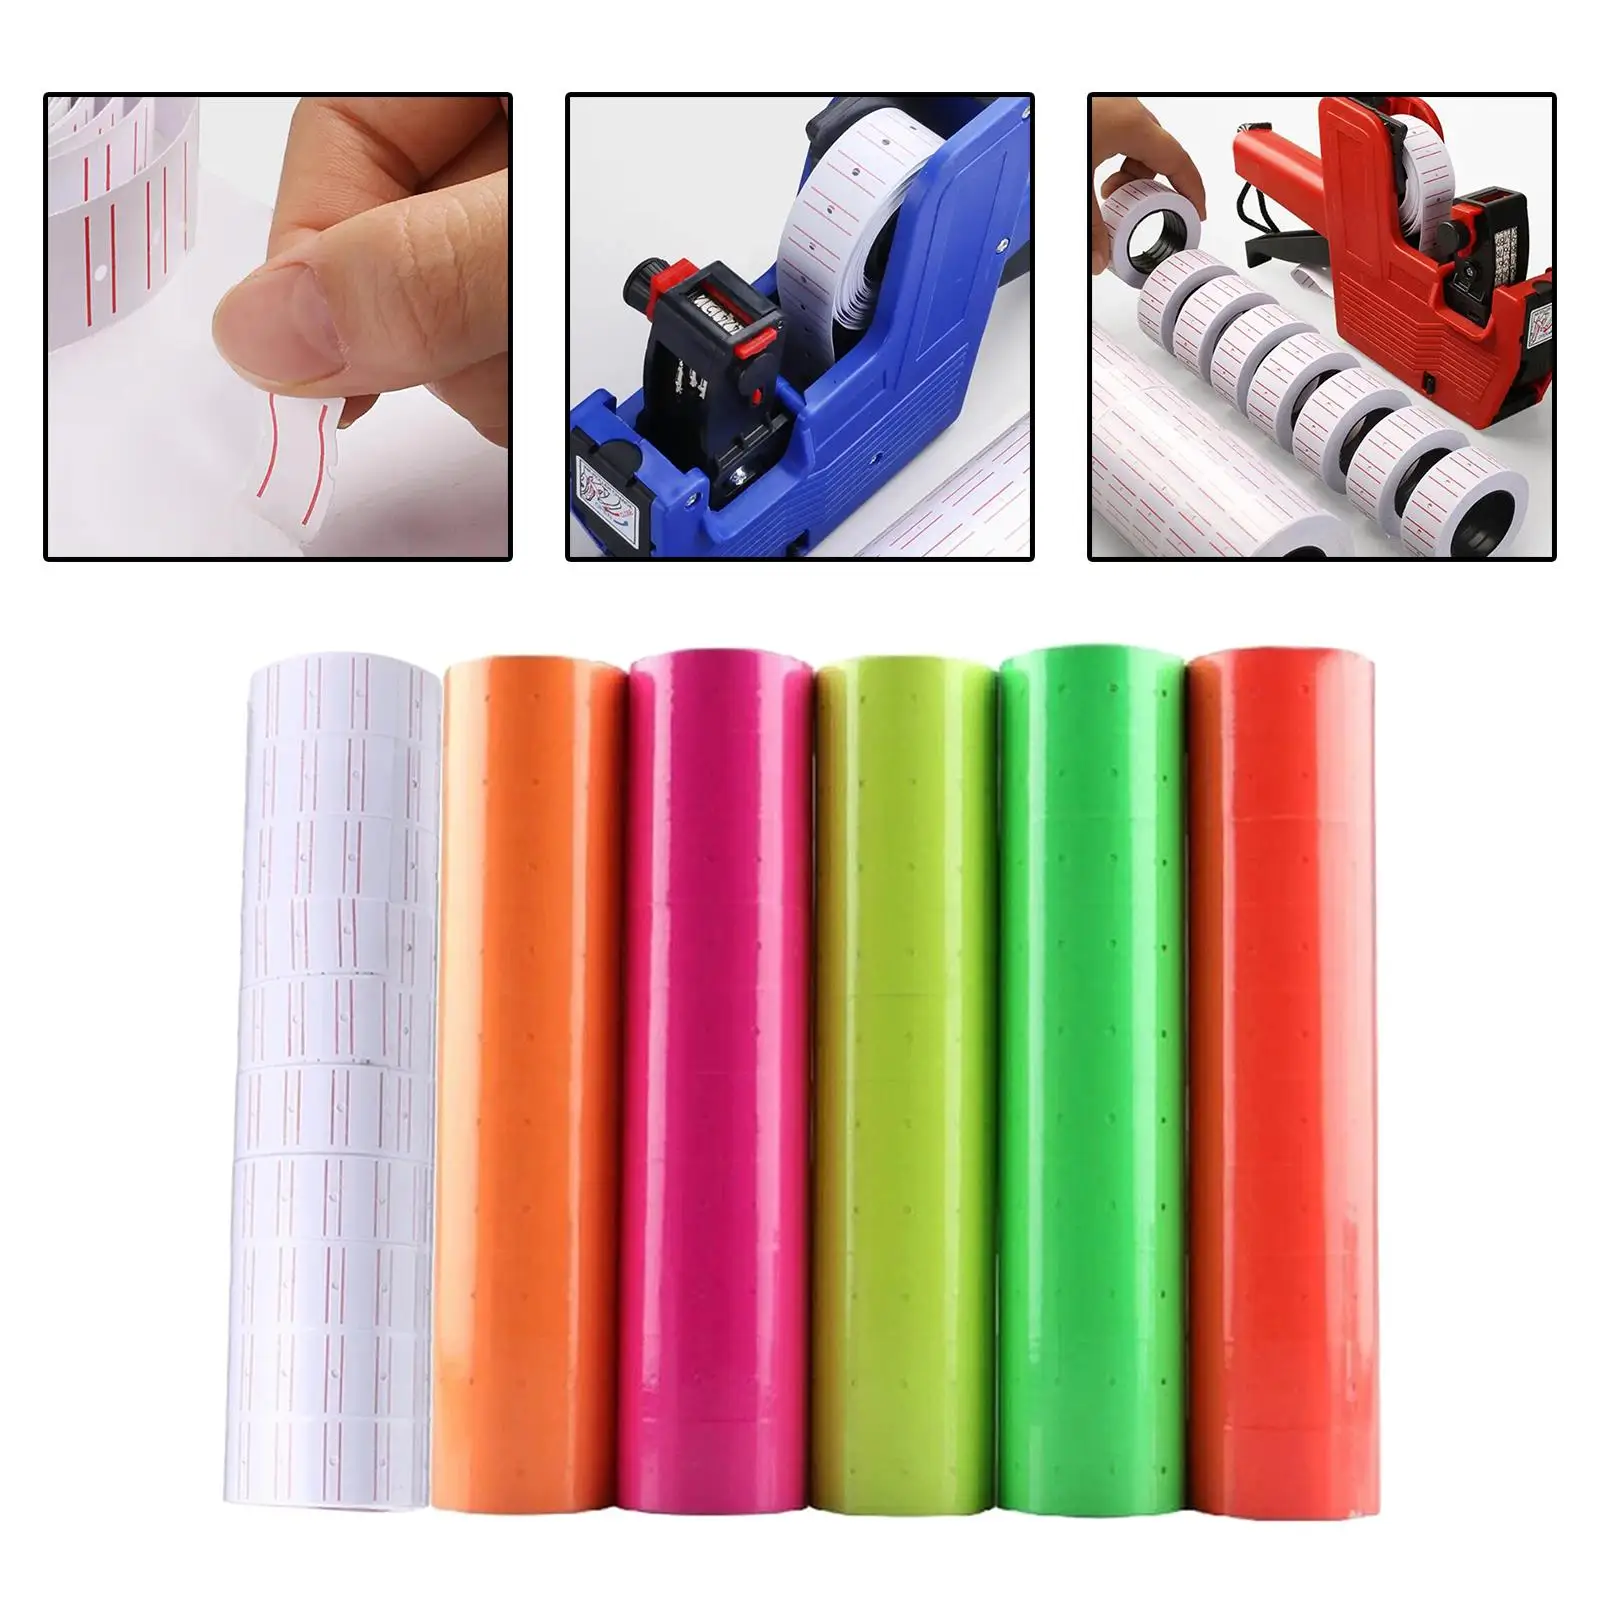 60Pcs Label Price Paper Labeling Tagging Supplies Marking Prices Tags Rolls Pricemarker for Stores Use Retail Shop Supermarkets